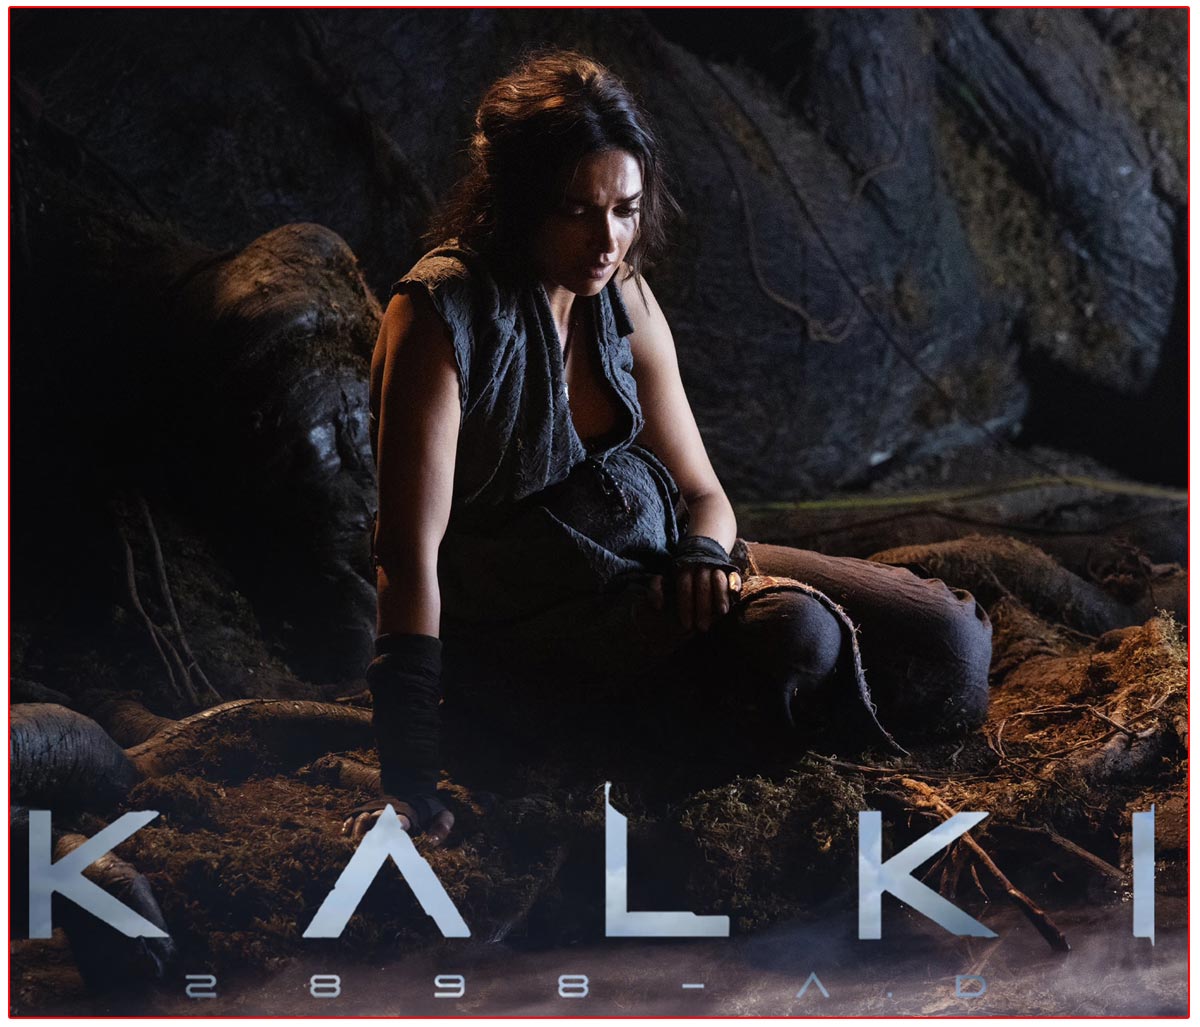  Deepika Padukone Fans Disappointed With Kalki 2898 AD